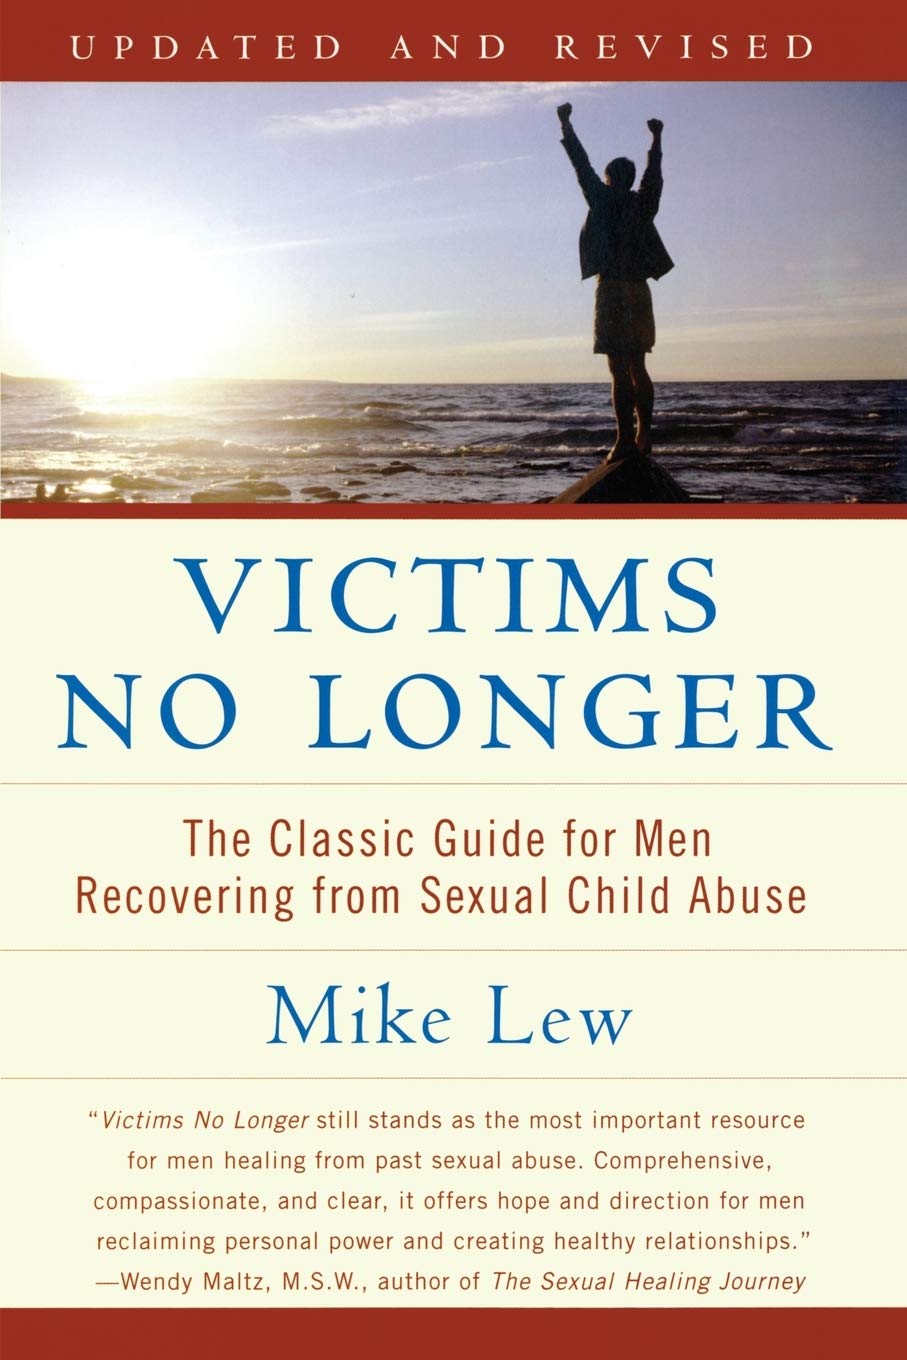 Victims No Longer (Second Edition): The Classic Guide for Men Recovering from Sexual Child Abuse [Mike Lew]